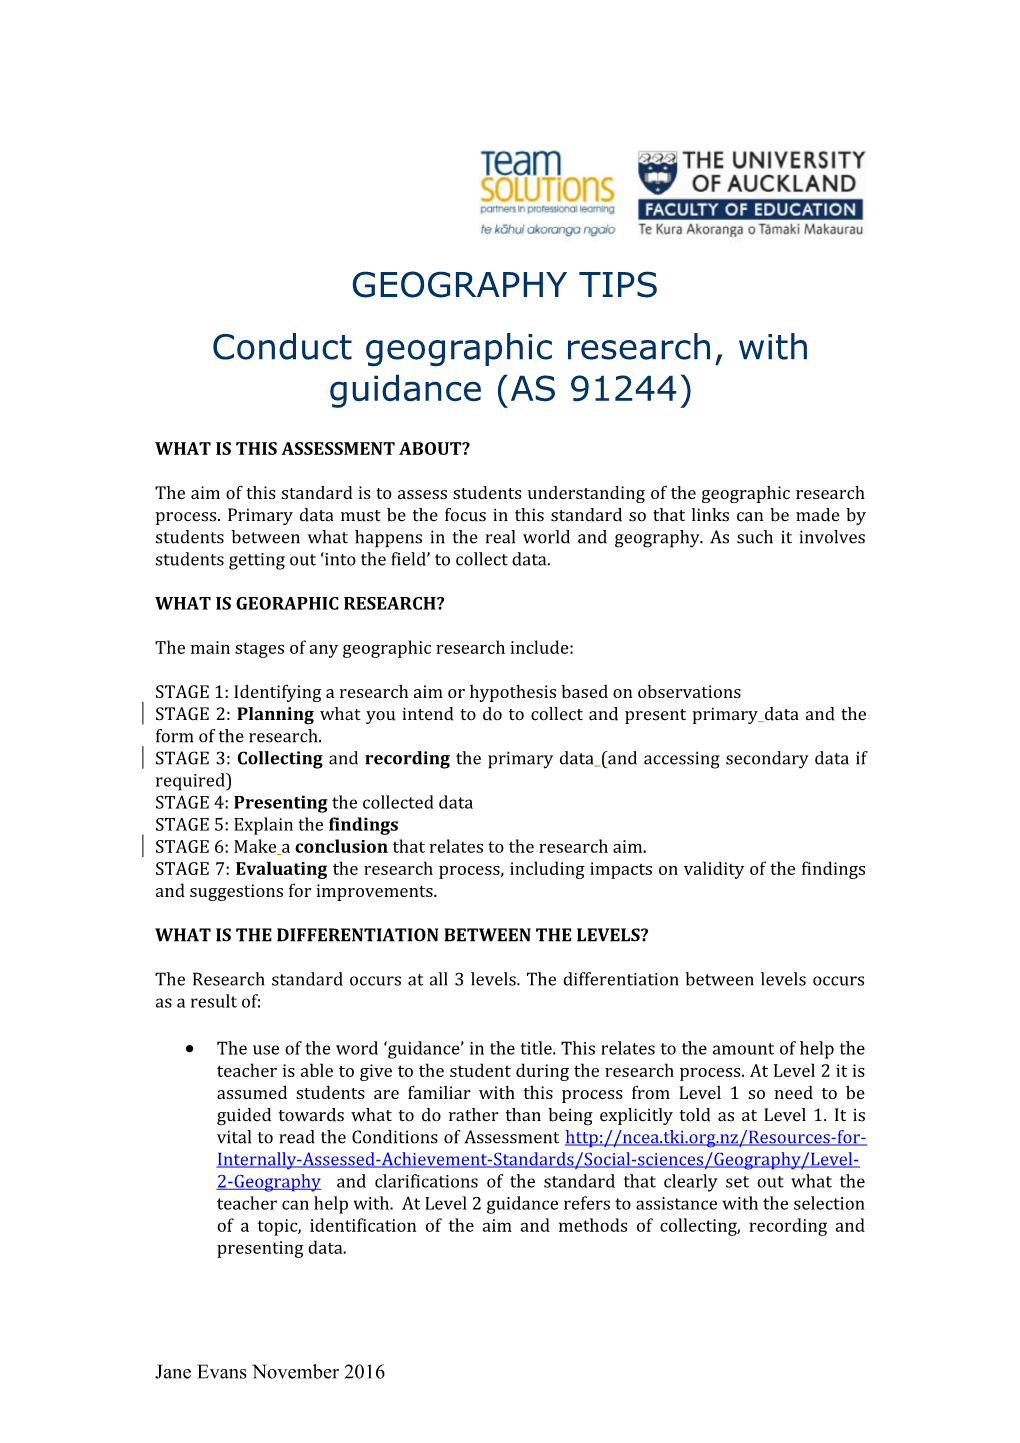 Conduct Geographic Research, with Guidance (AS 91244)